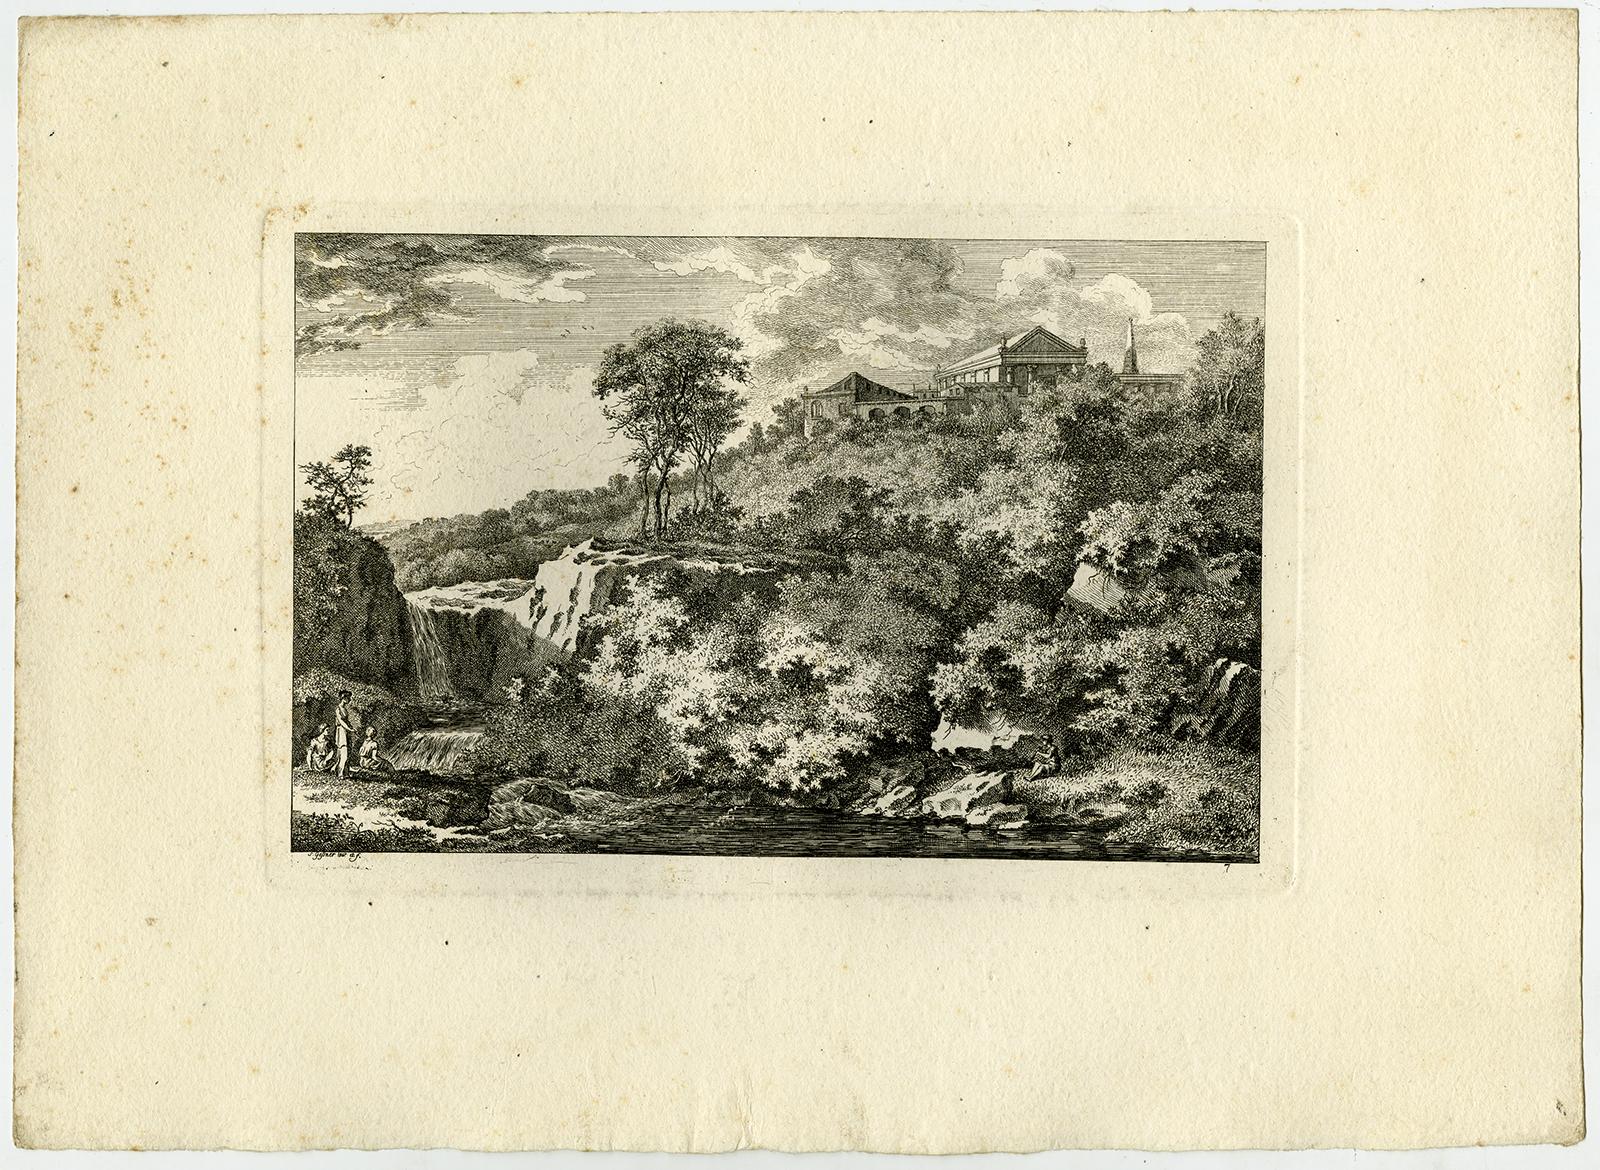 Subject:  Antique Master Print, untitled.  - Landscape with a temple on a hill, with women near a waterfall.

Description:  From a set with landscapes in the 'antique' taste. . Ref: L/E ? .

Artists and Engravers:  Made by 'Salomon Gessner' after